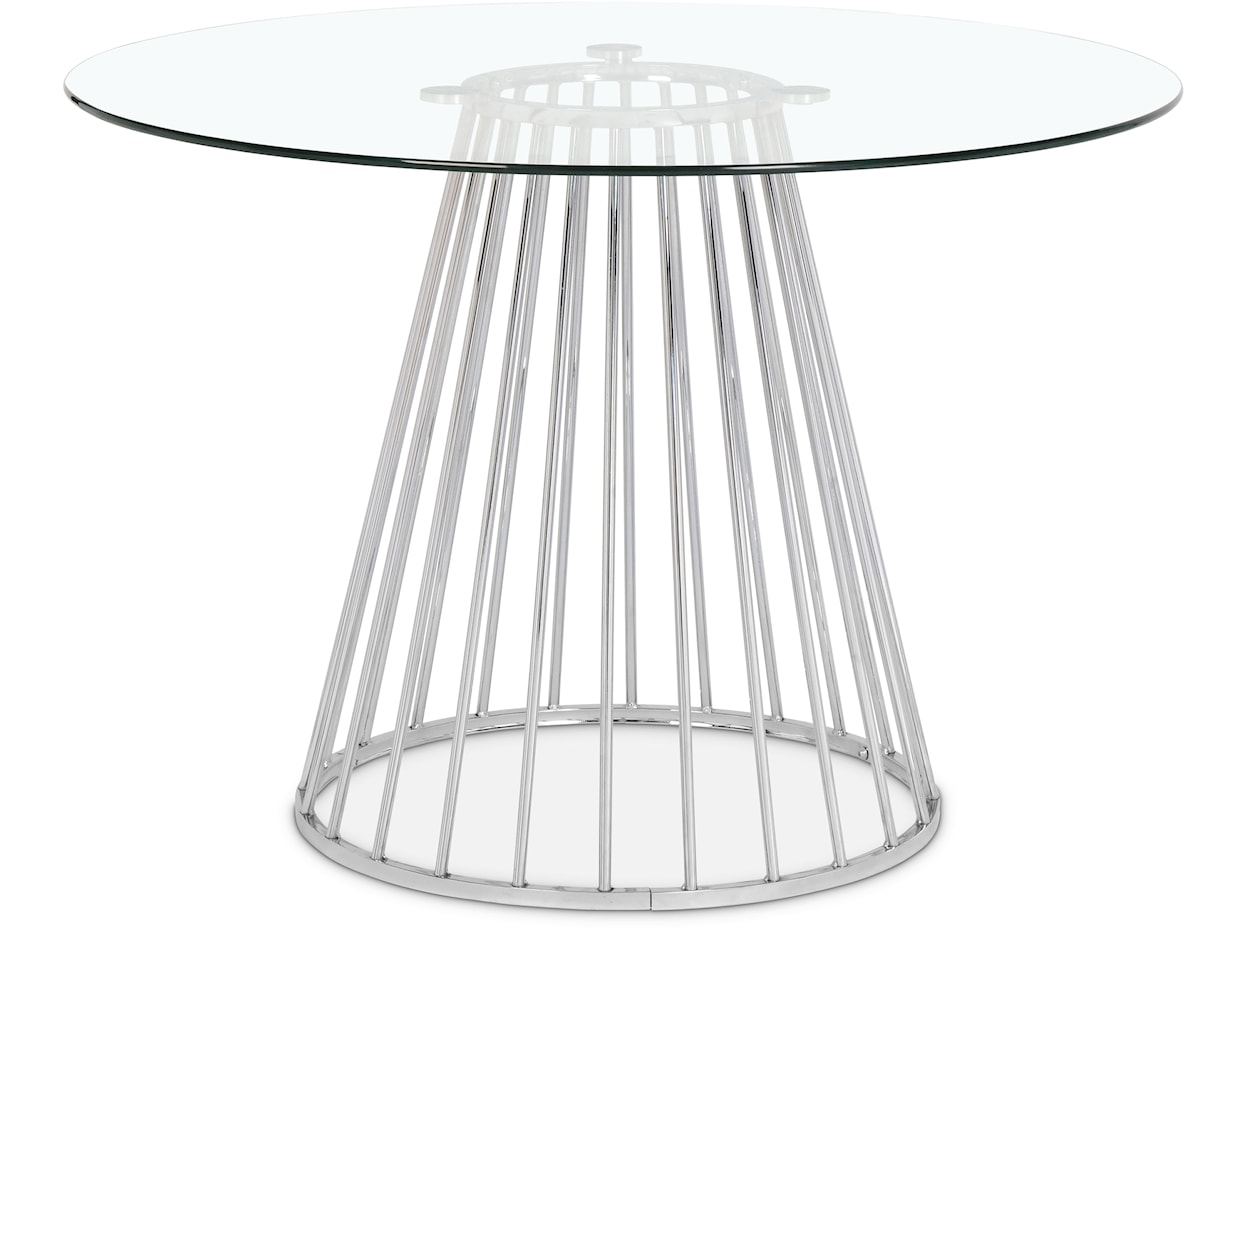 Meridian Furniture Gio Dining Table